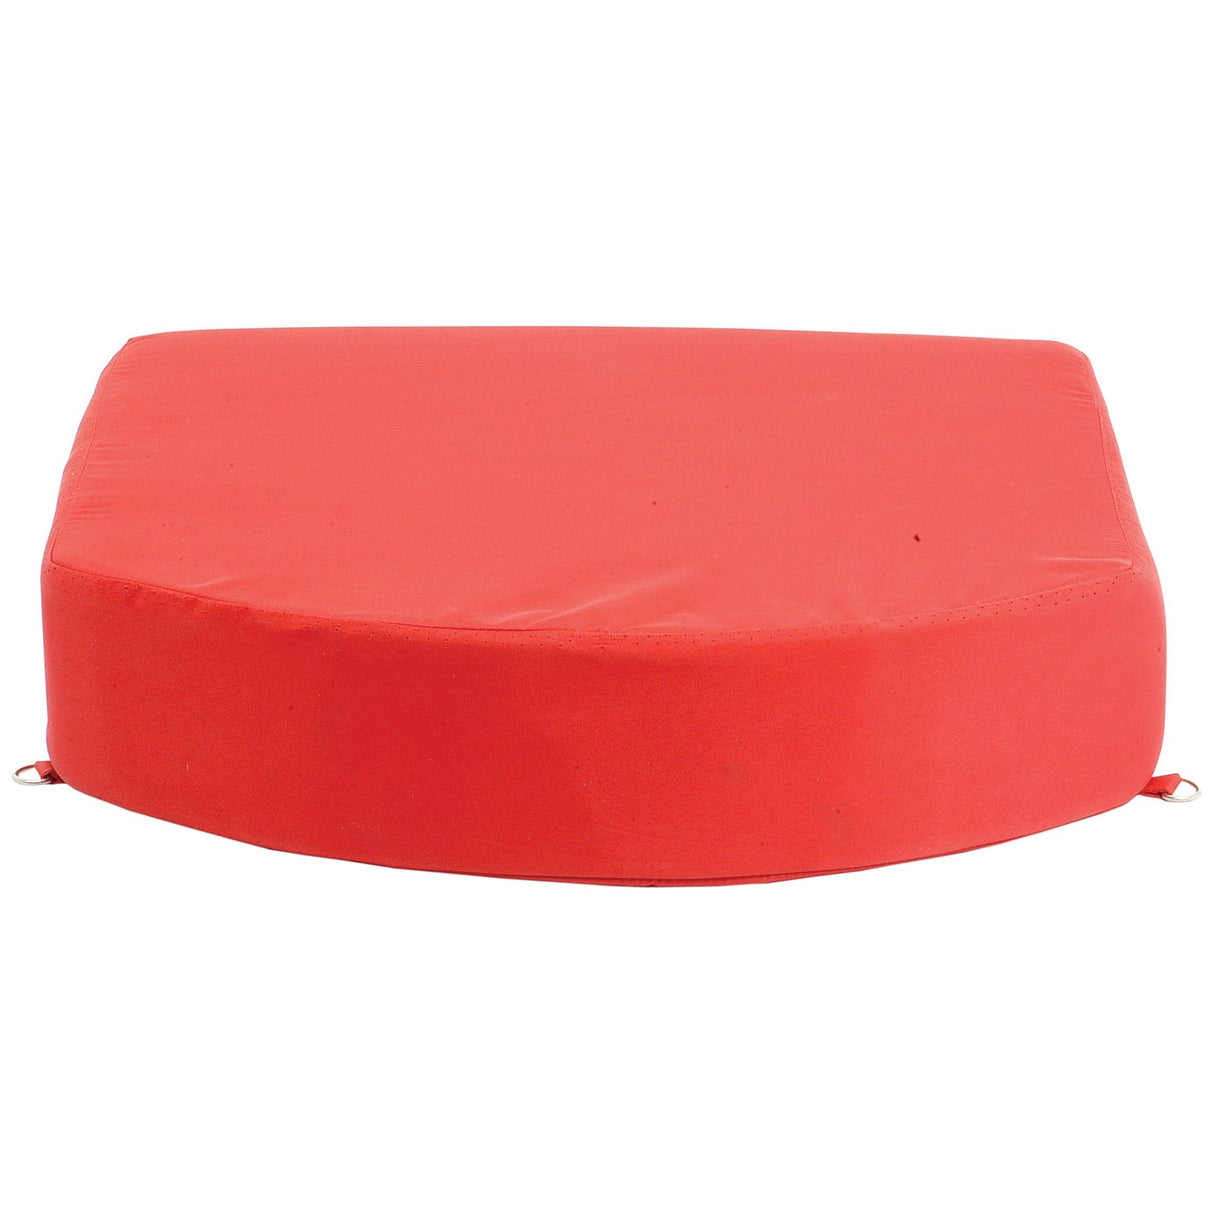 Seat Cushion - Red
 - S.670 - Farming Parts